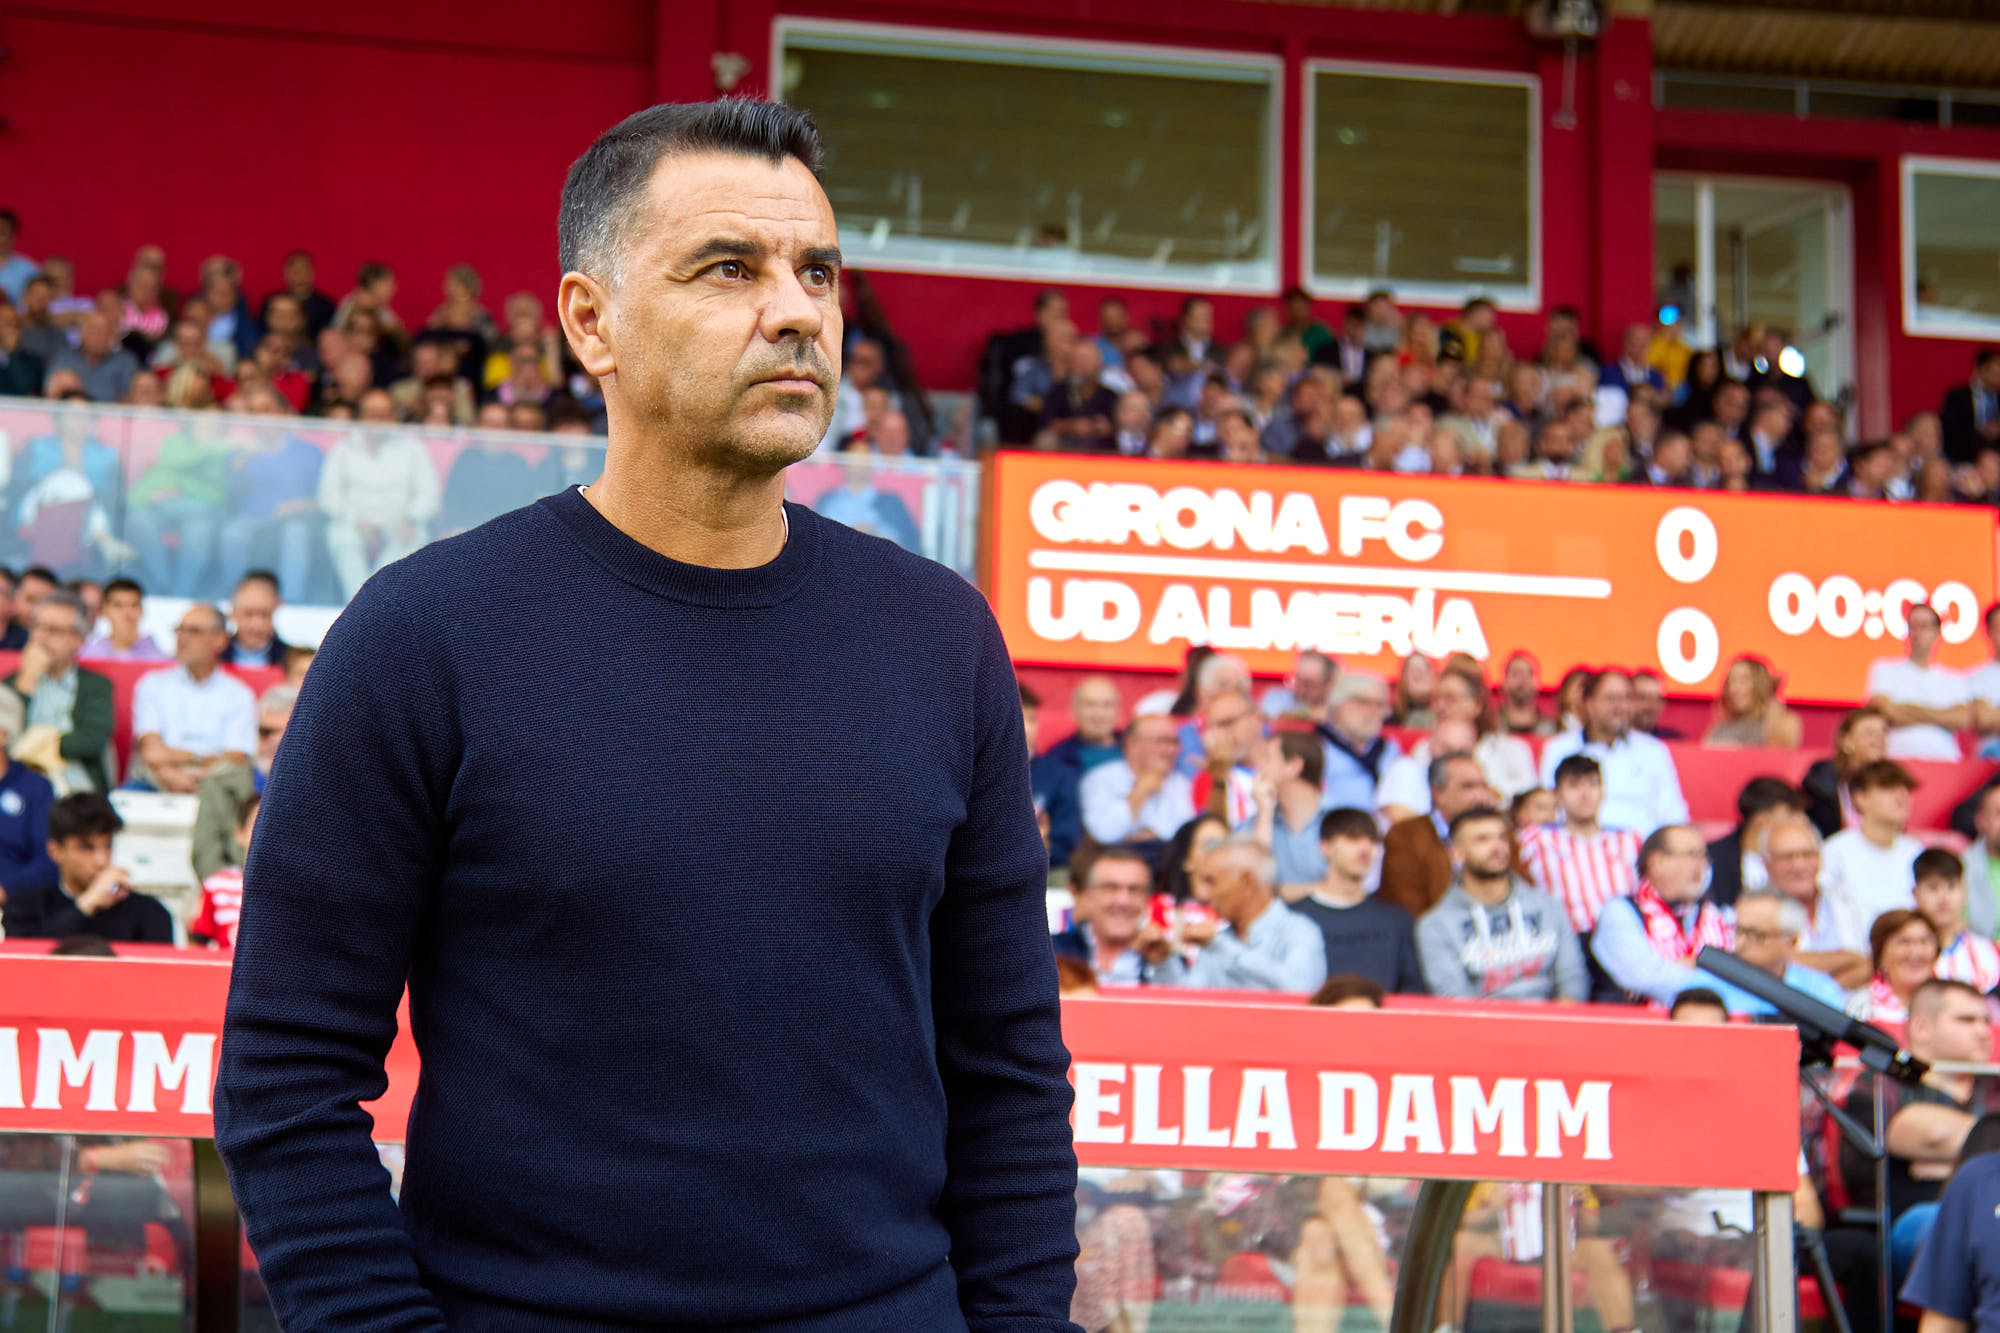 The story of Michel, the coach who has led Girona to the top of La Liga  with an entertaining brand of attacking football - Football España